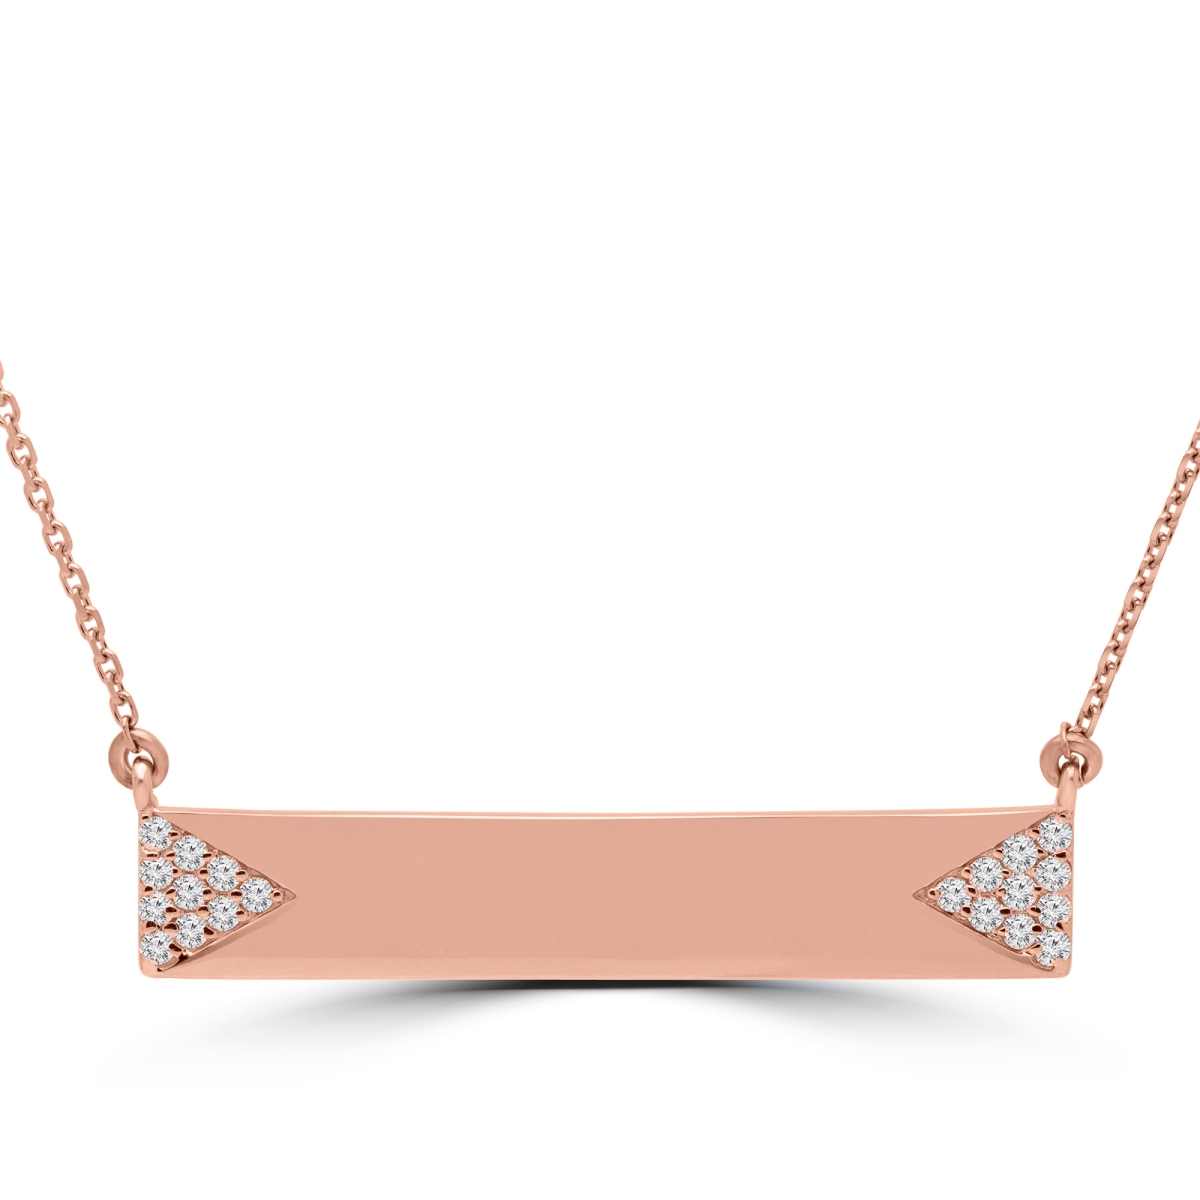 Md170336 0.25 Ctw Round Diamond Bar Pendant Necklace In 14k Rose Gold With Chain, Size